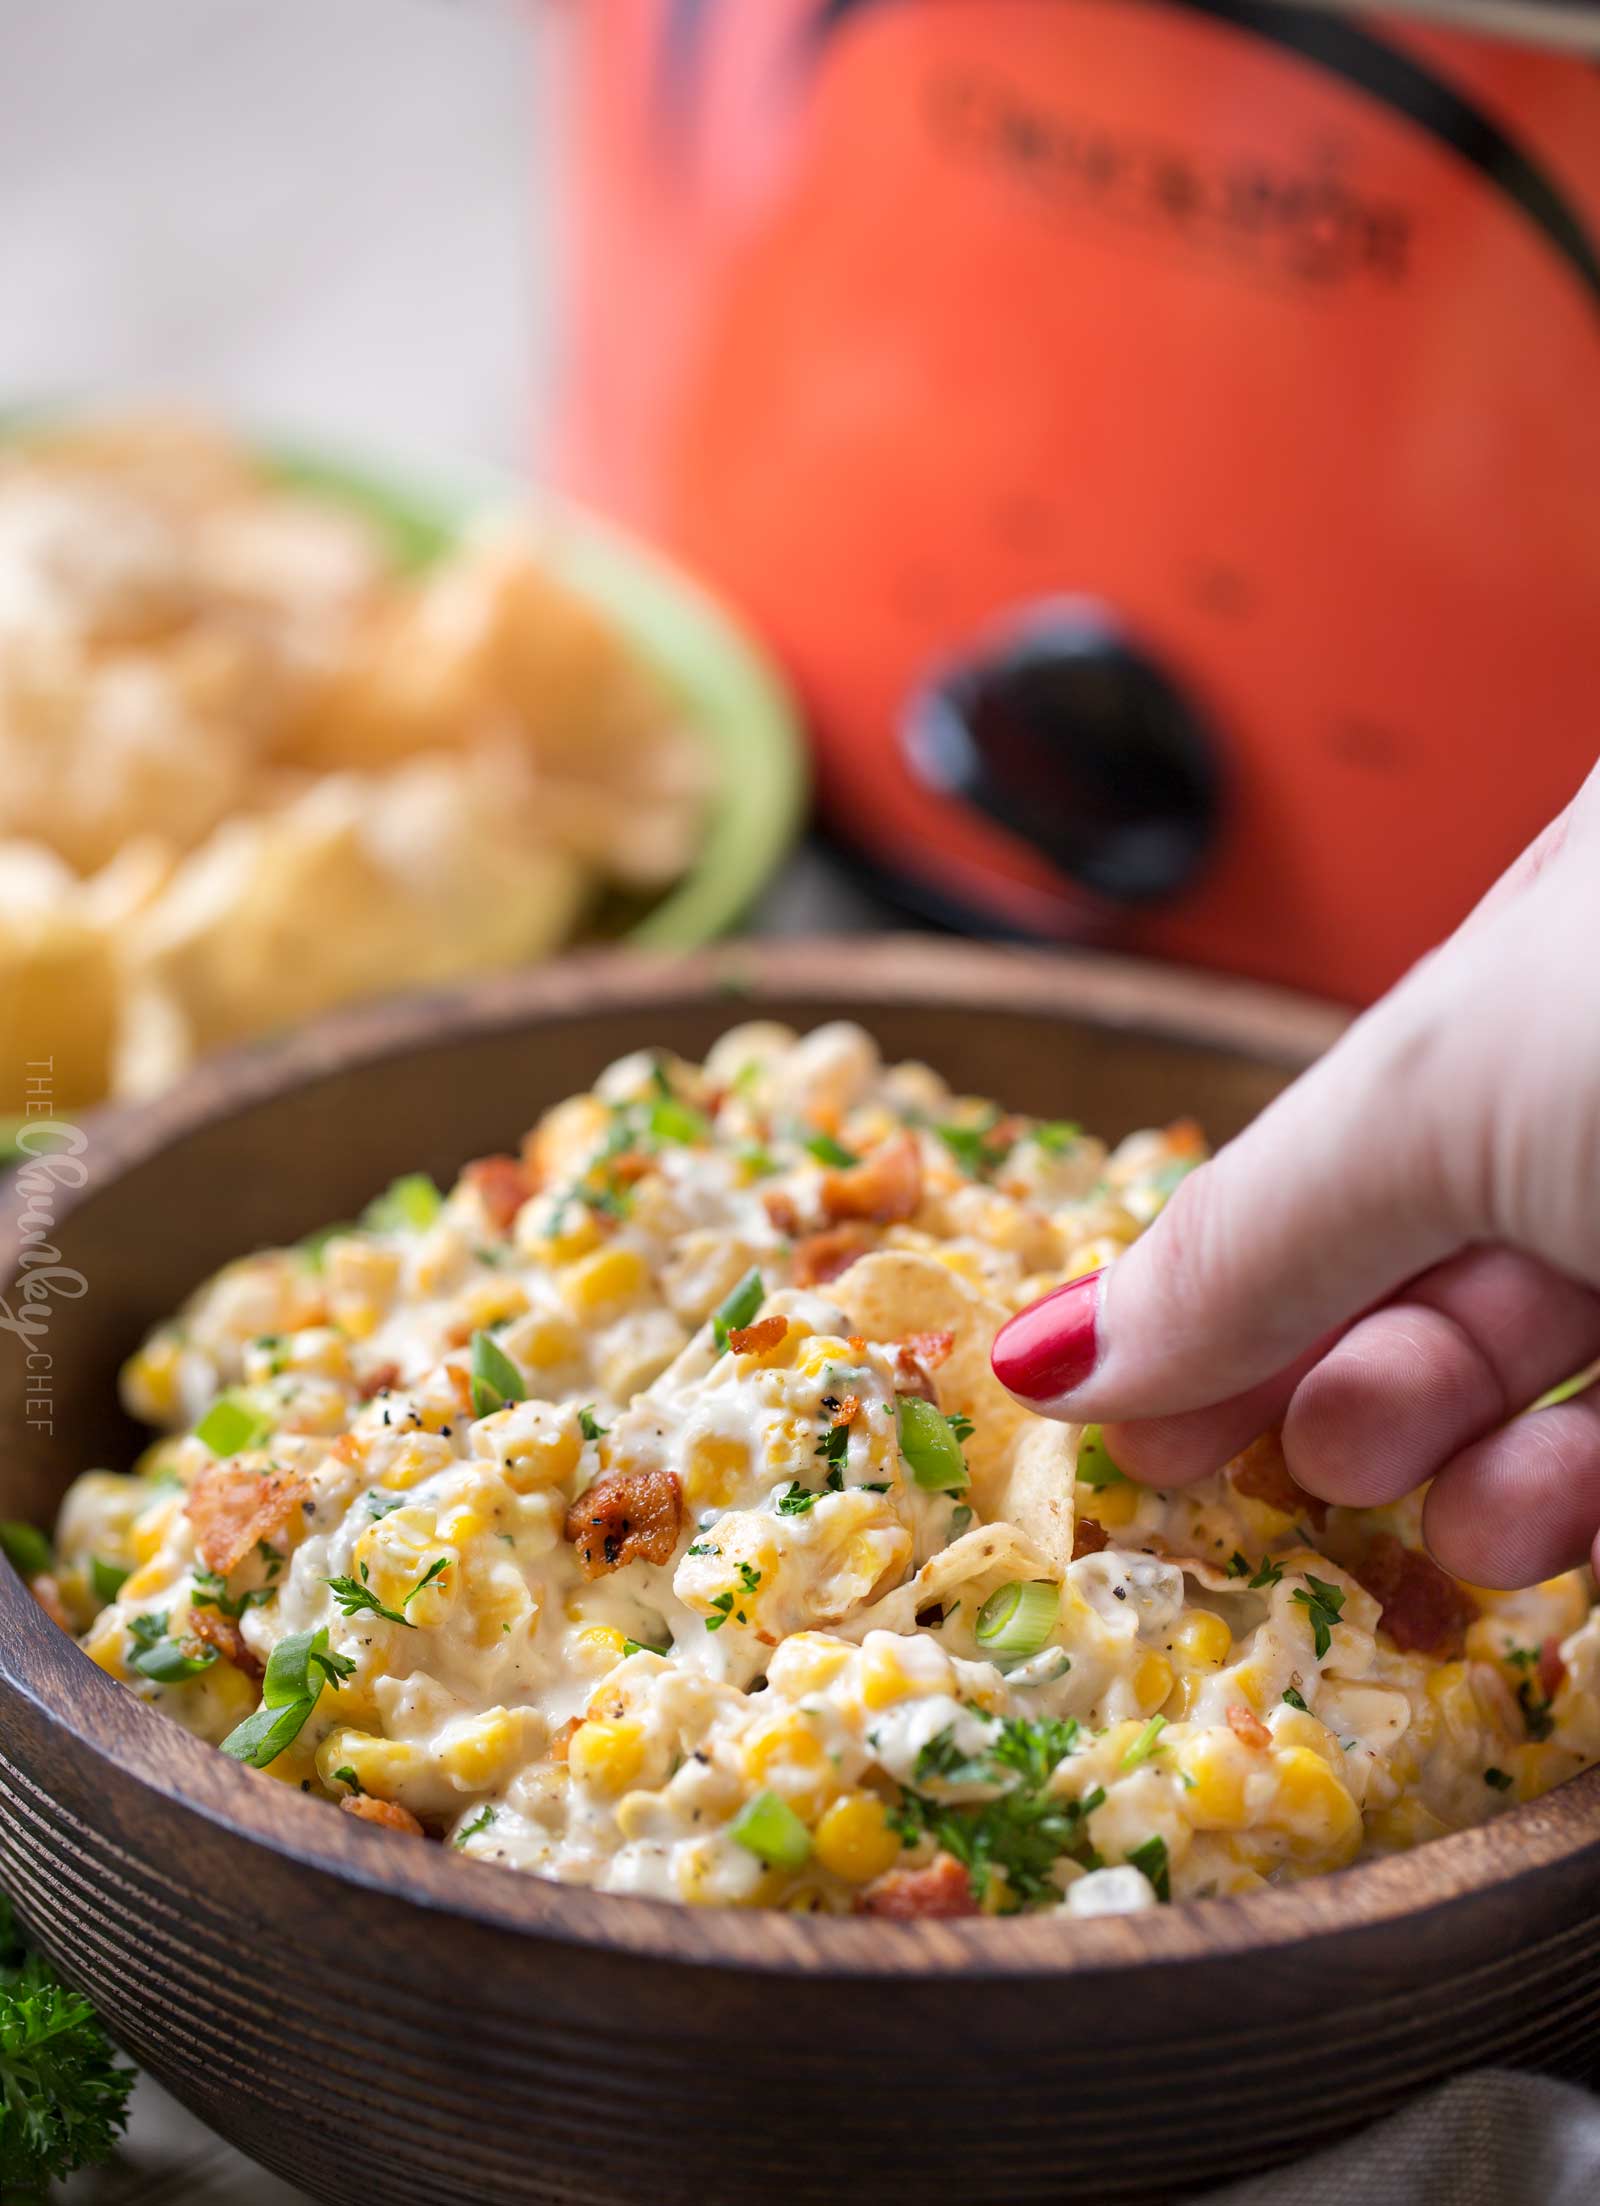 https://www.thechunkychef.com/wp-content/uploads/2017/11/Slow-Cooker-Spicy-Creamy-Corn-Dip-11.jpg